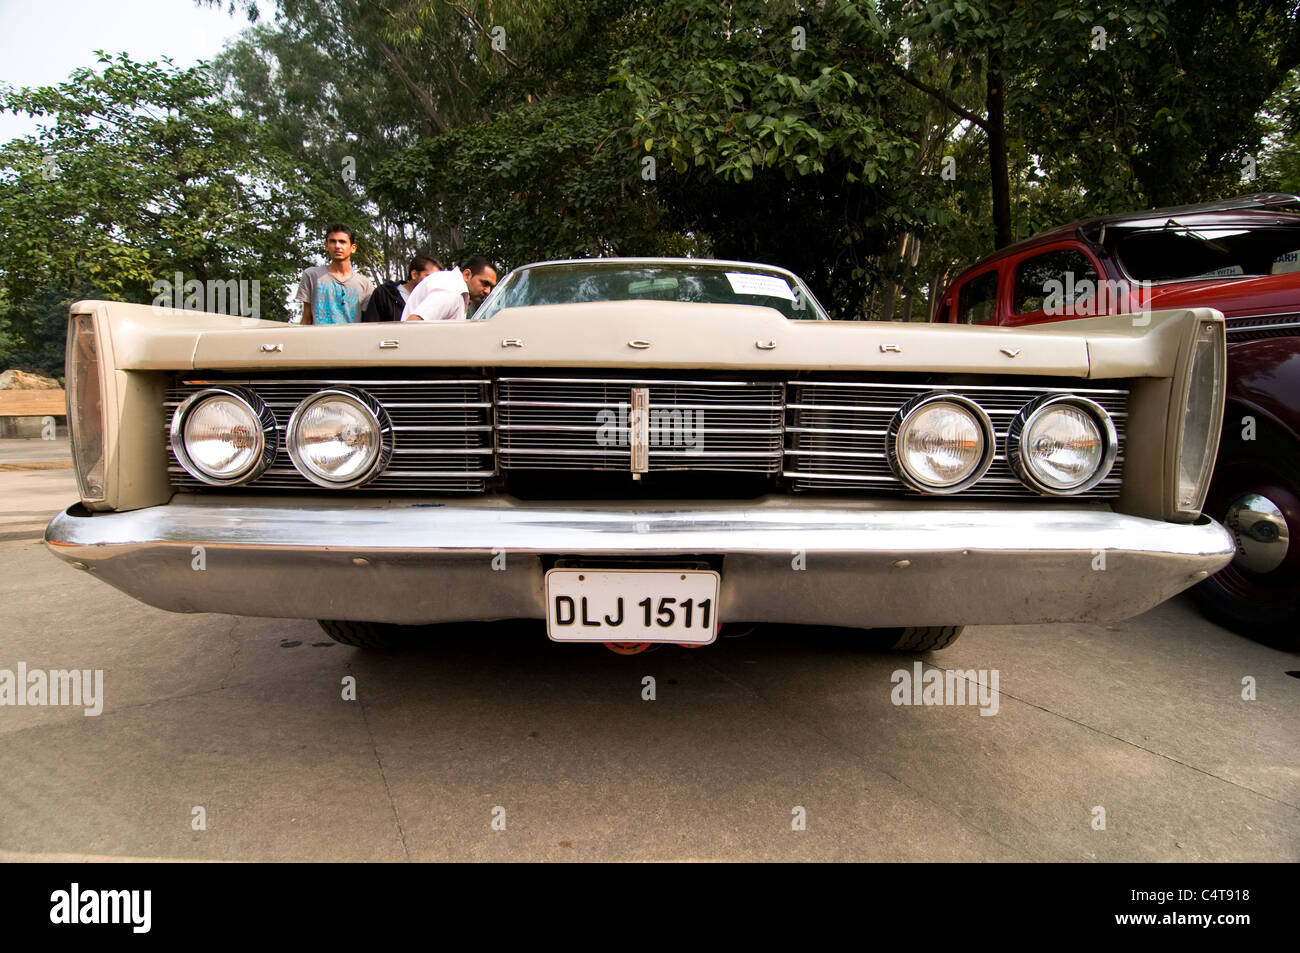 A beautiful old Mercury car on display during a vintage car show in Chandigarh, India. Stock Photo